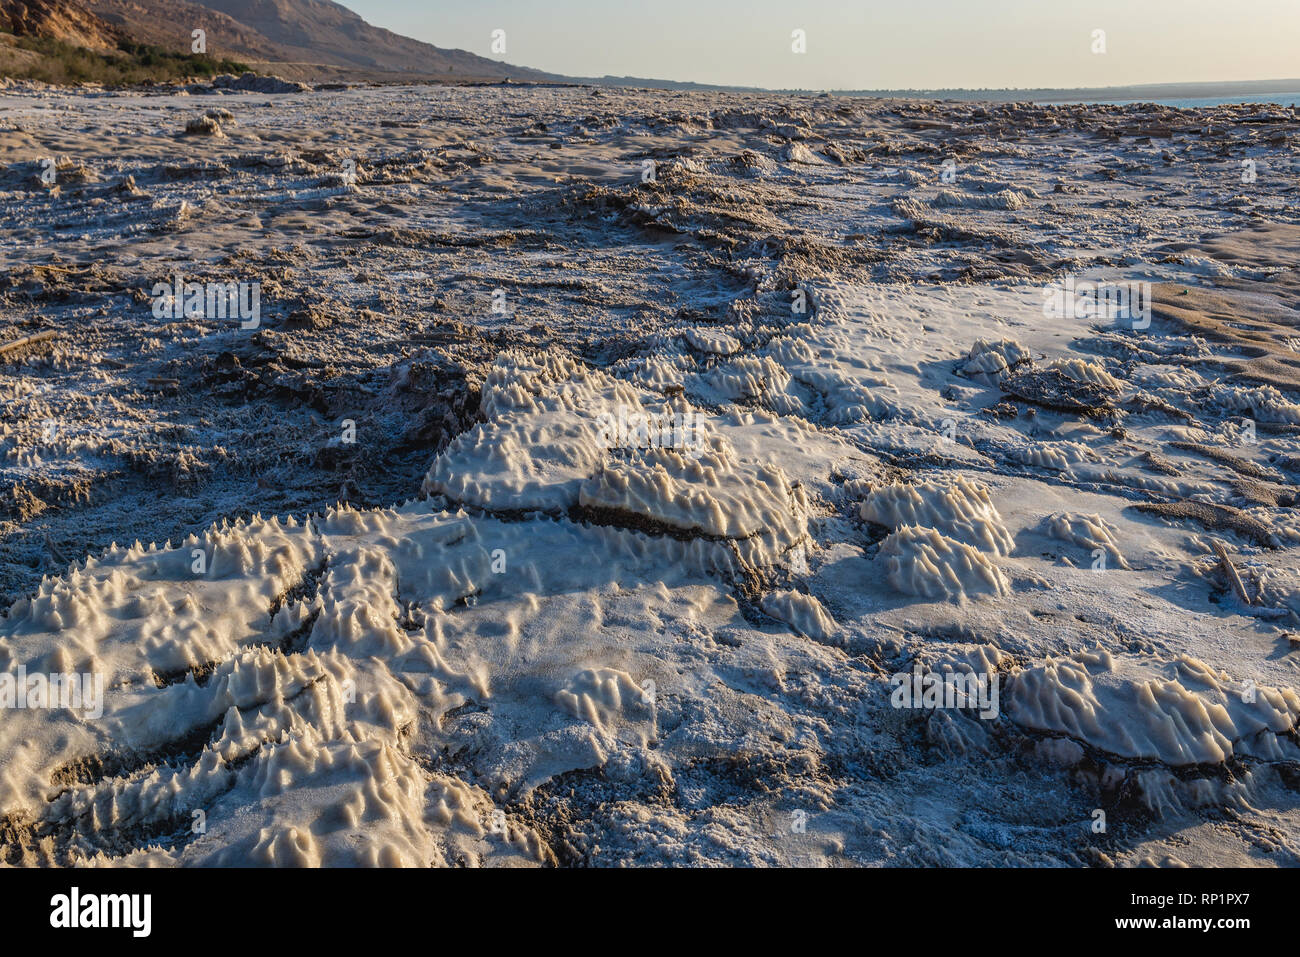 Halite structures on a shore of Dead Sea in Jordan Stock Photo